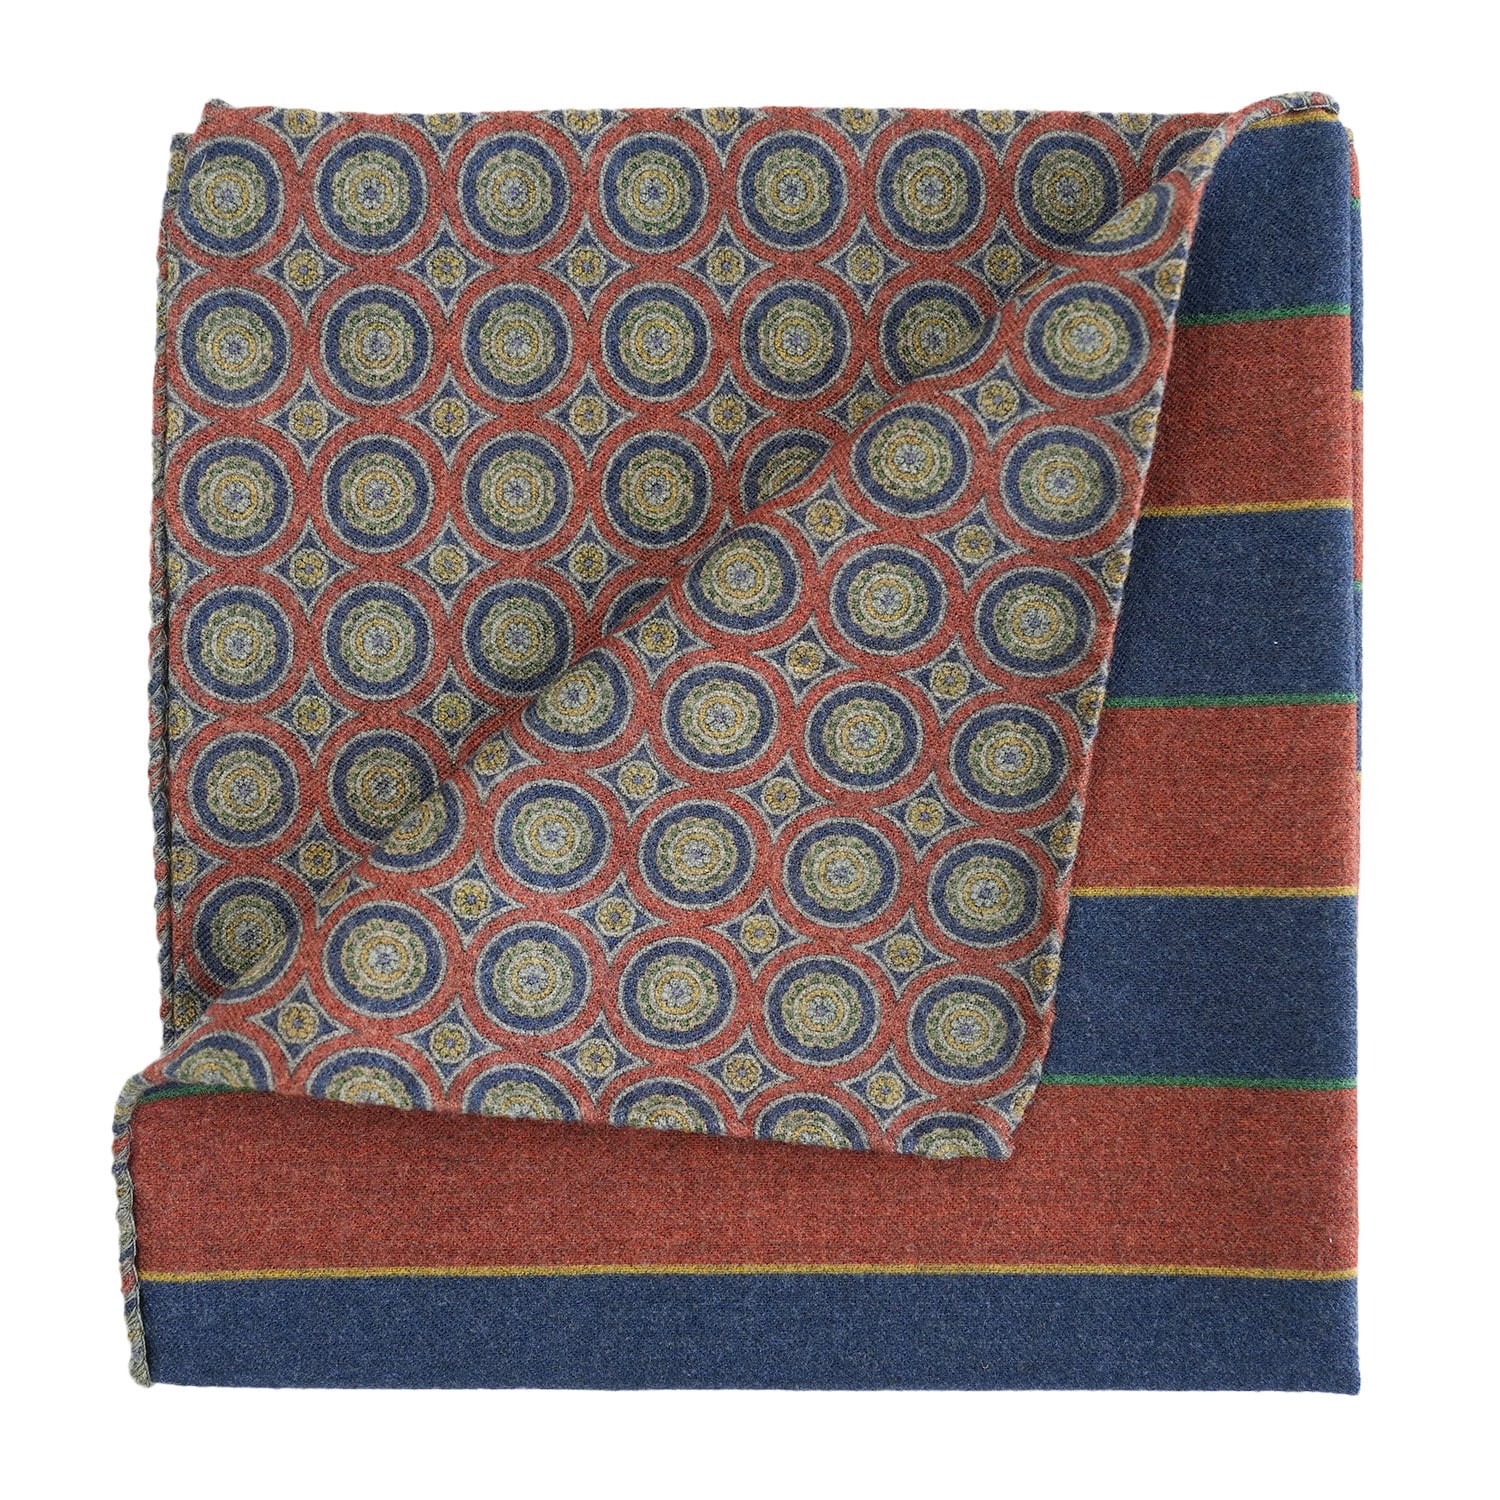 Eton striped blue and red pocket square doublesided